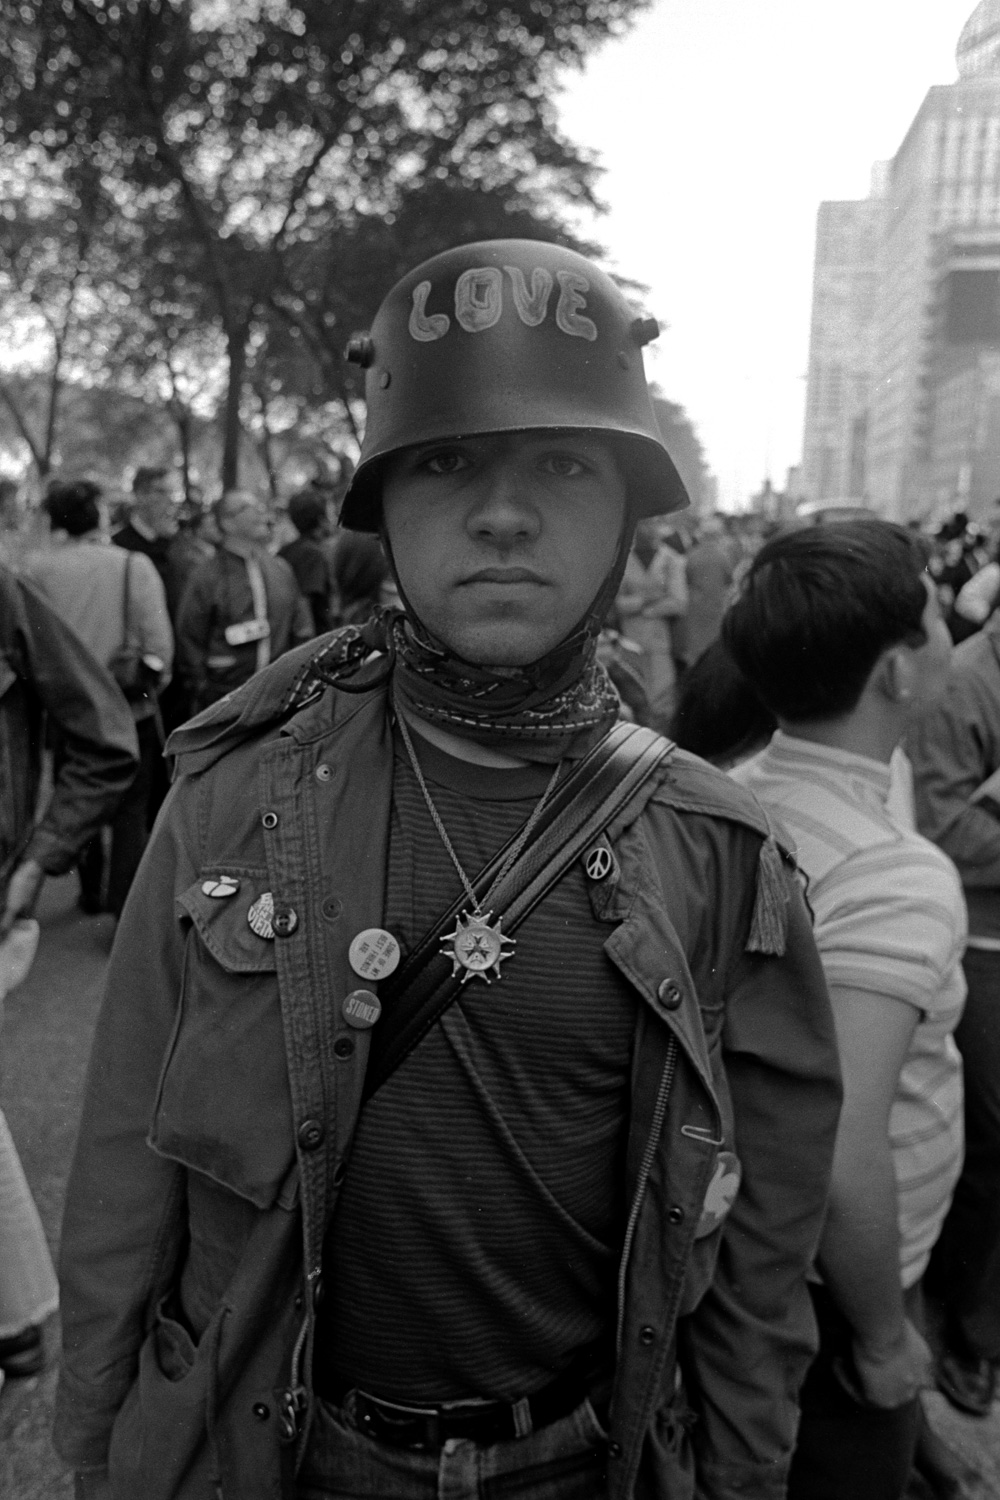  Tough love in 1968 meant dressing for combat, but showing your adversaries you were part of the love army. 